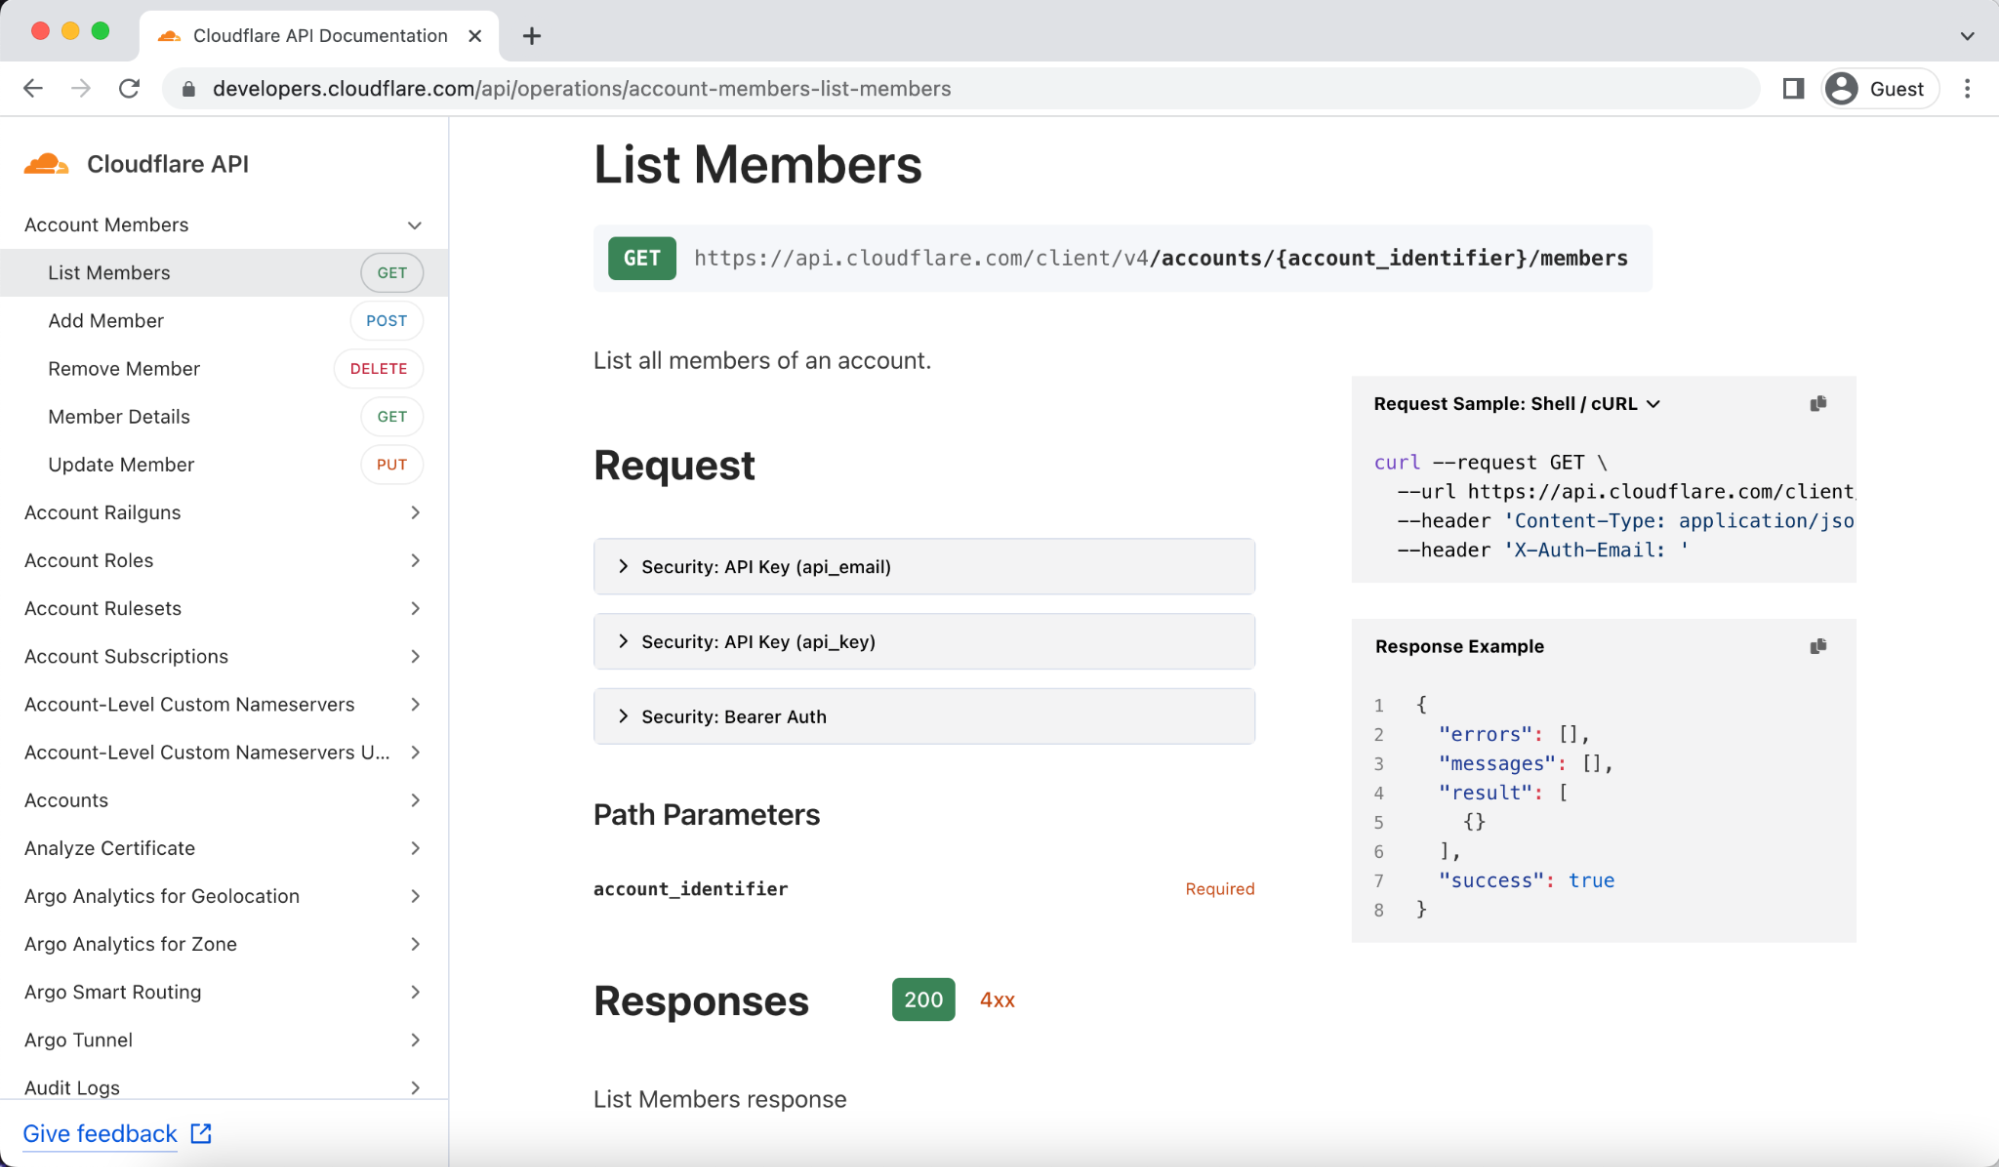 Screen capture of new API documentation site, showing List Members endpoint with authentication information, required parameters, and examples.